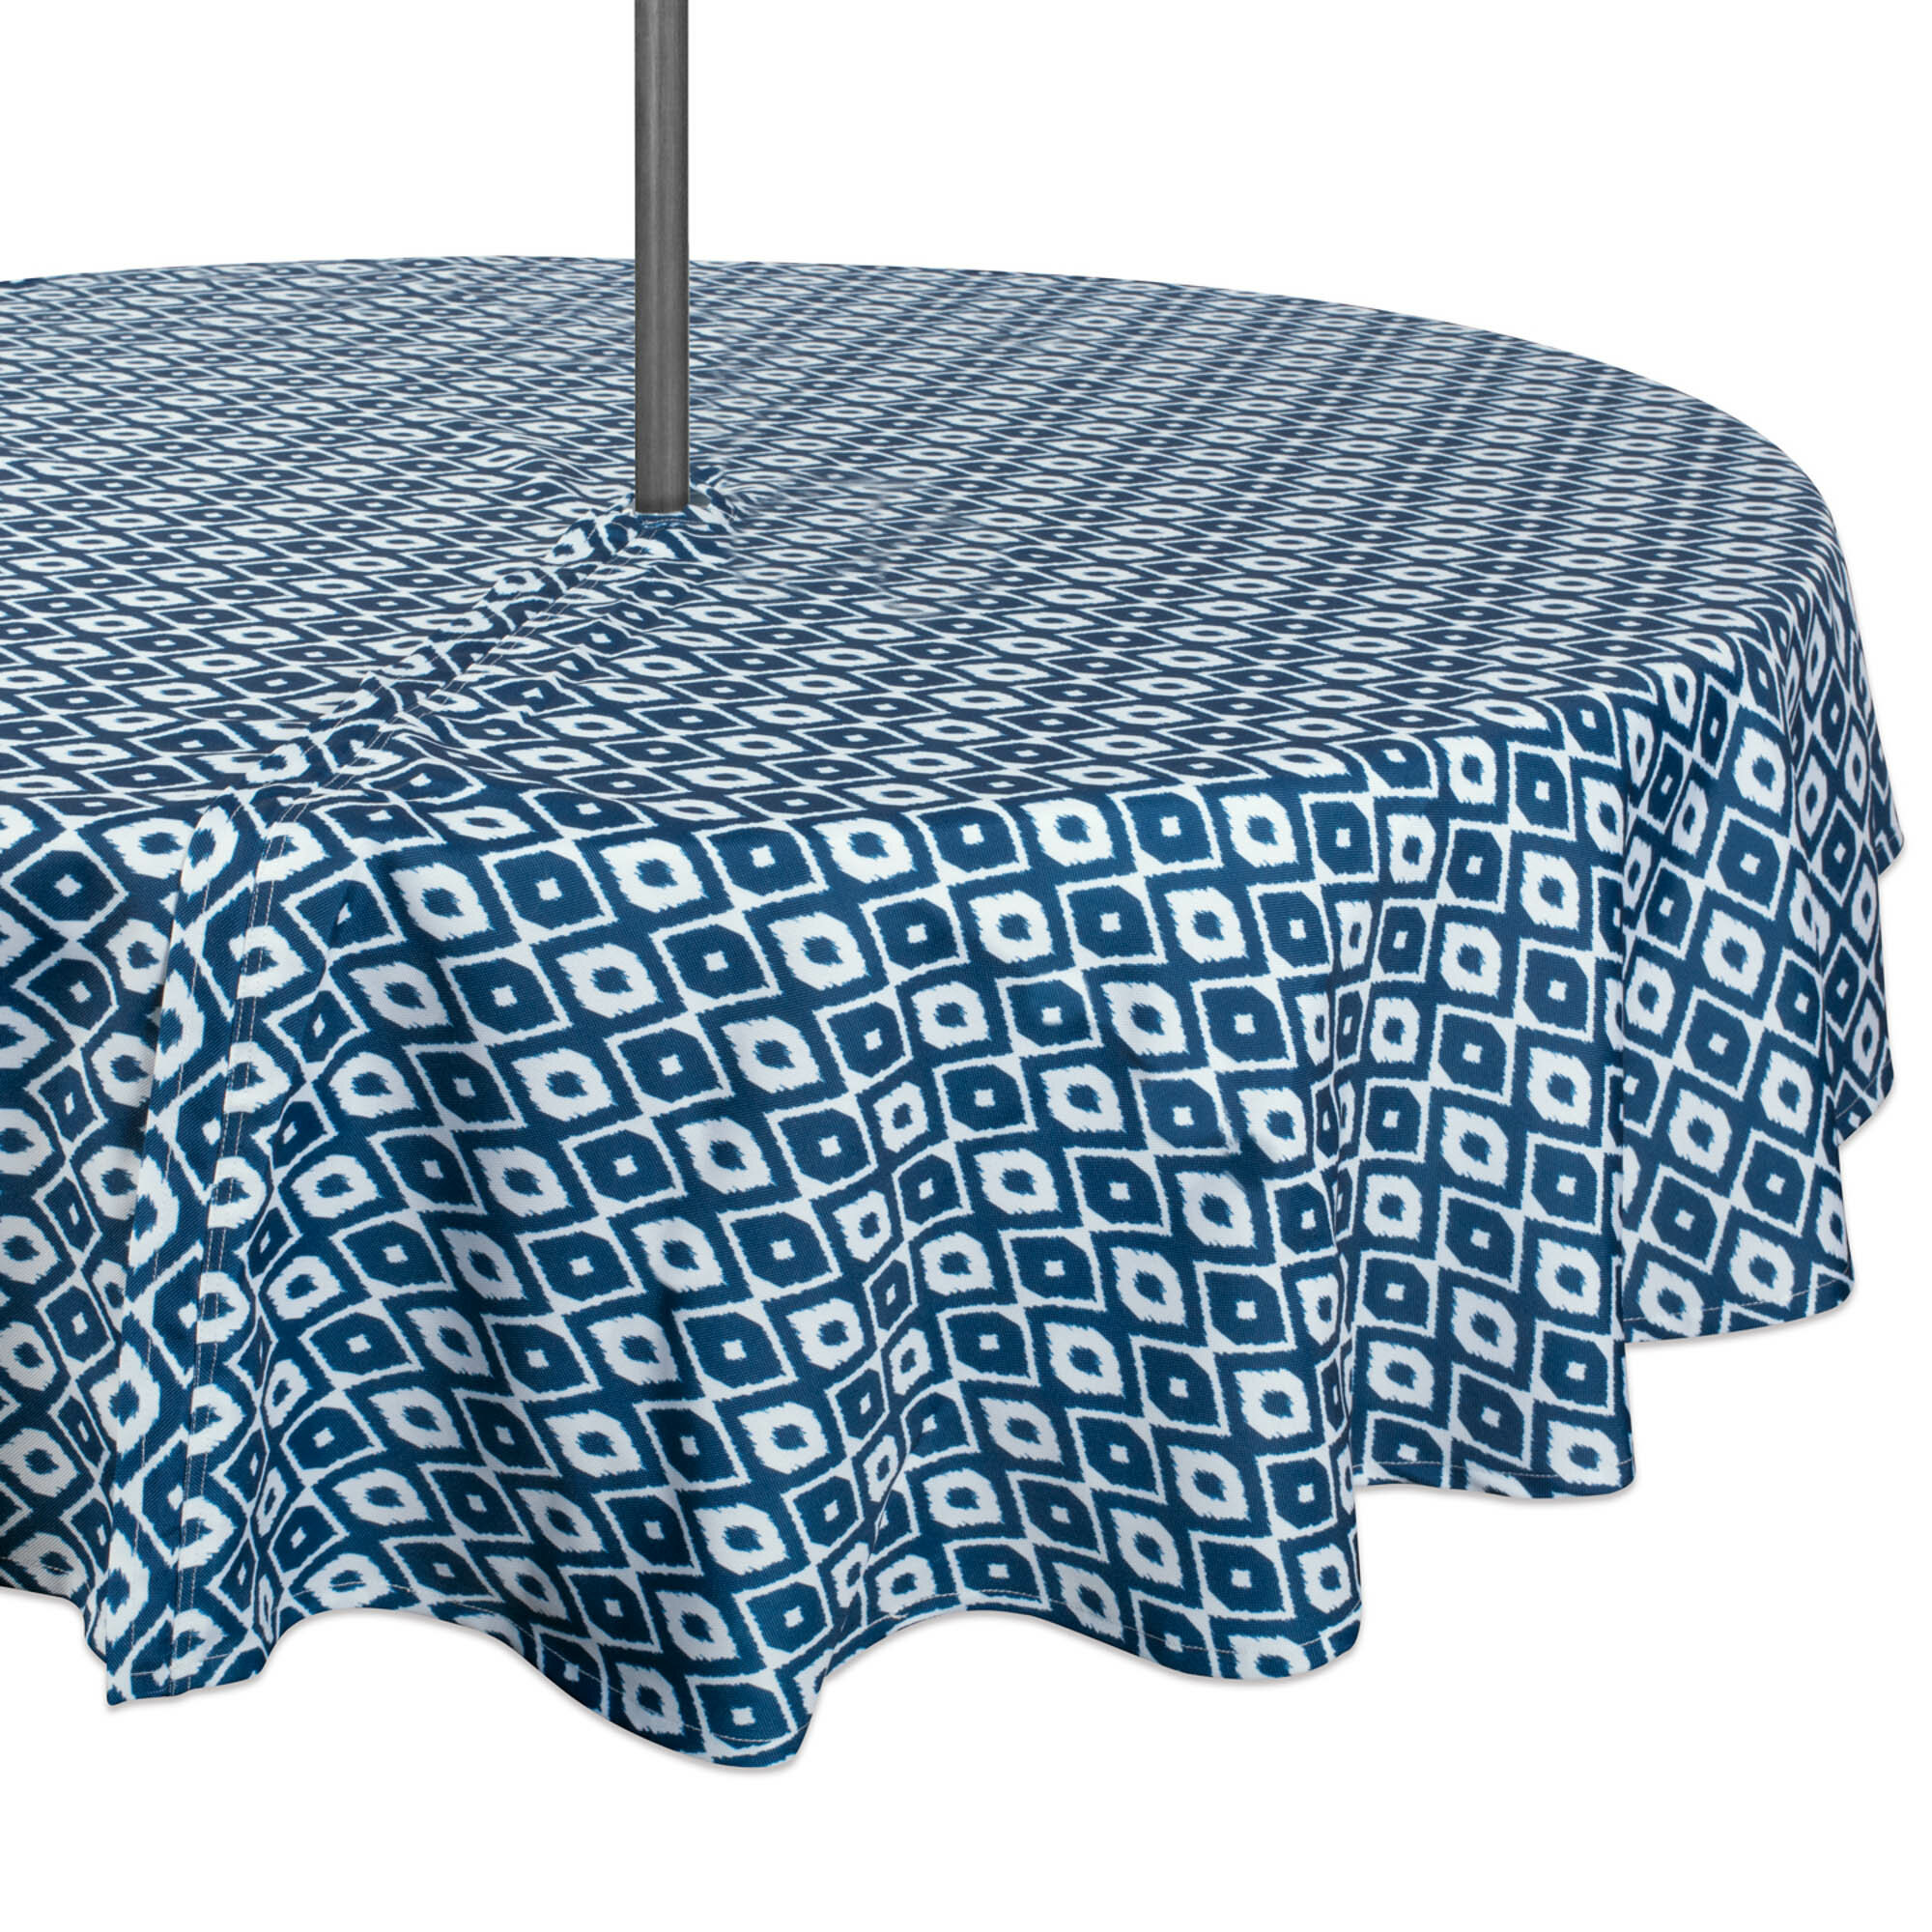 tablecloths for sale in bulk